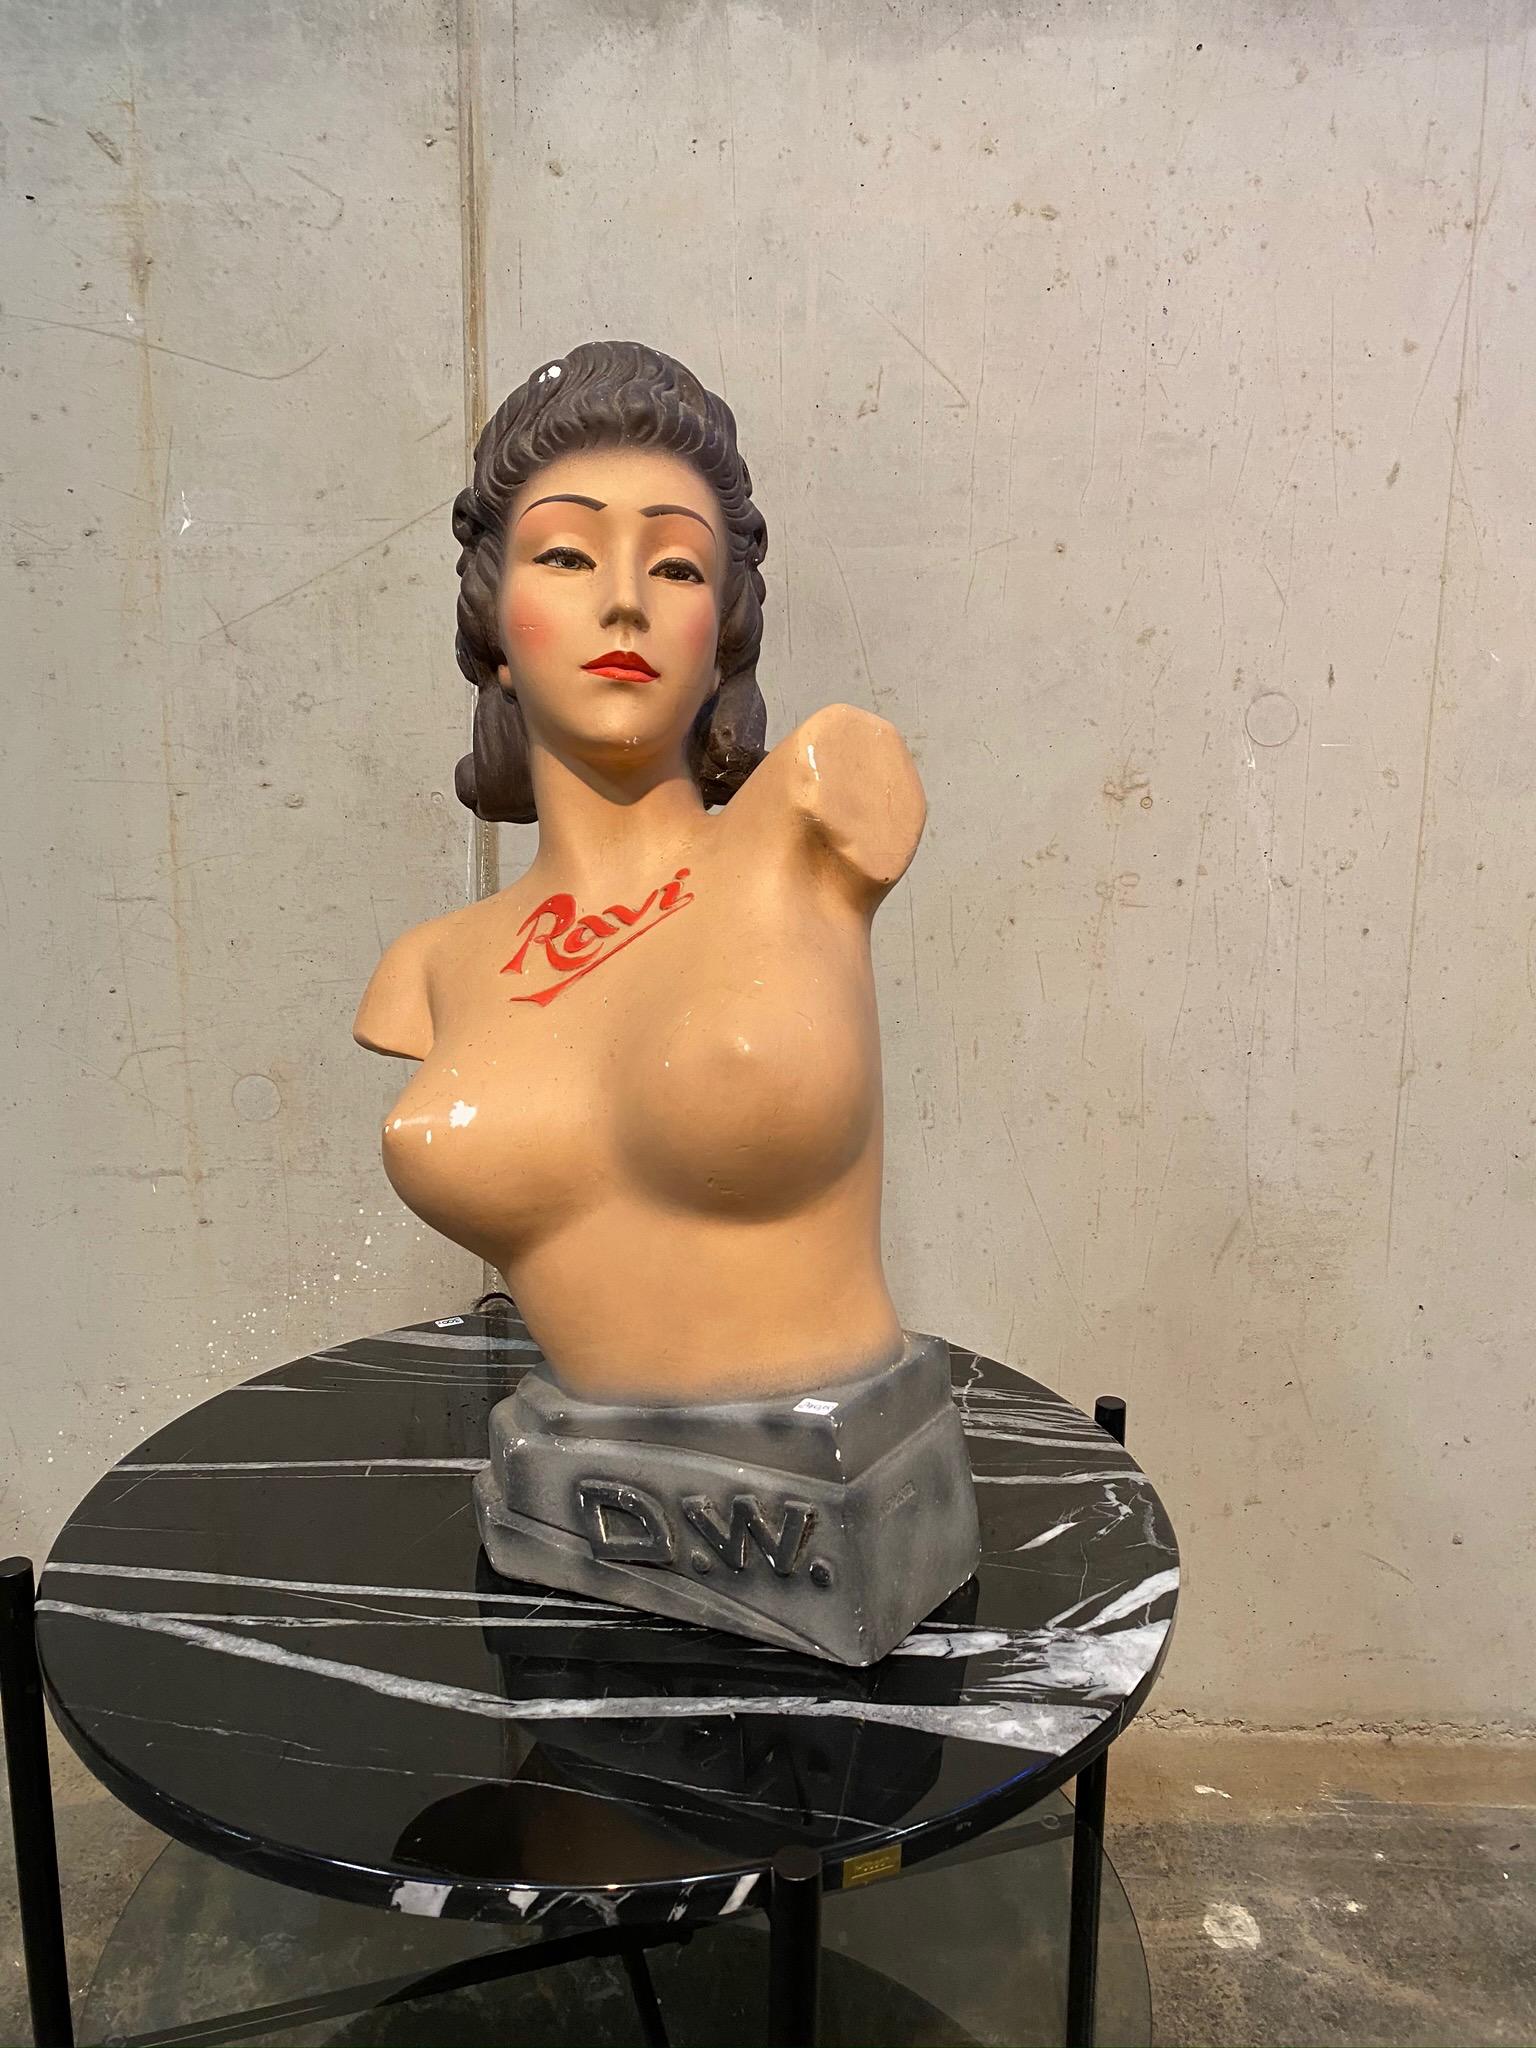 Original Art Deco bust by D.W. Novita. This impressive bust was a shop window decoration for lingerie in the 1950s and 1960s. It is in a good condition with time and traces of use and small spots with color loss (see photos).